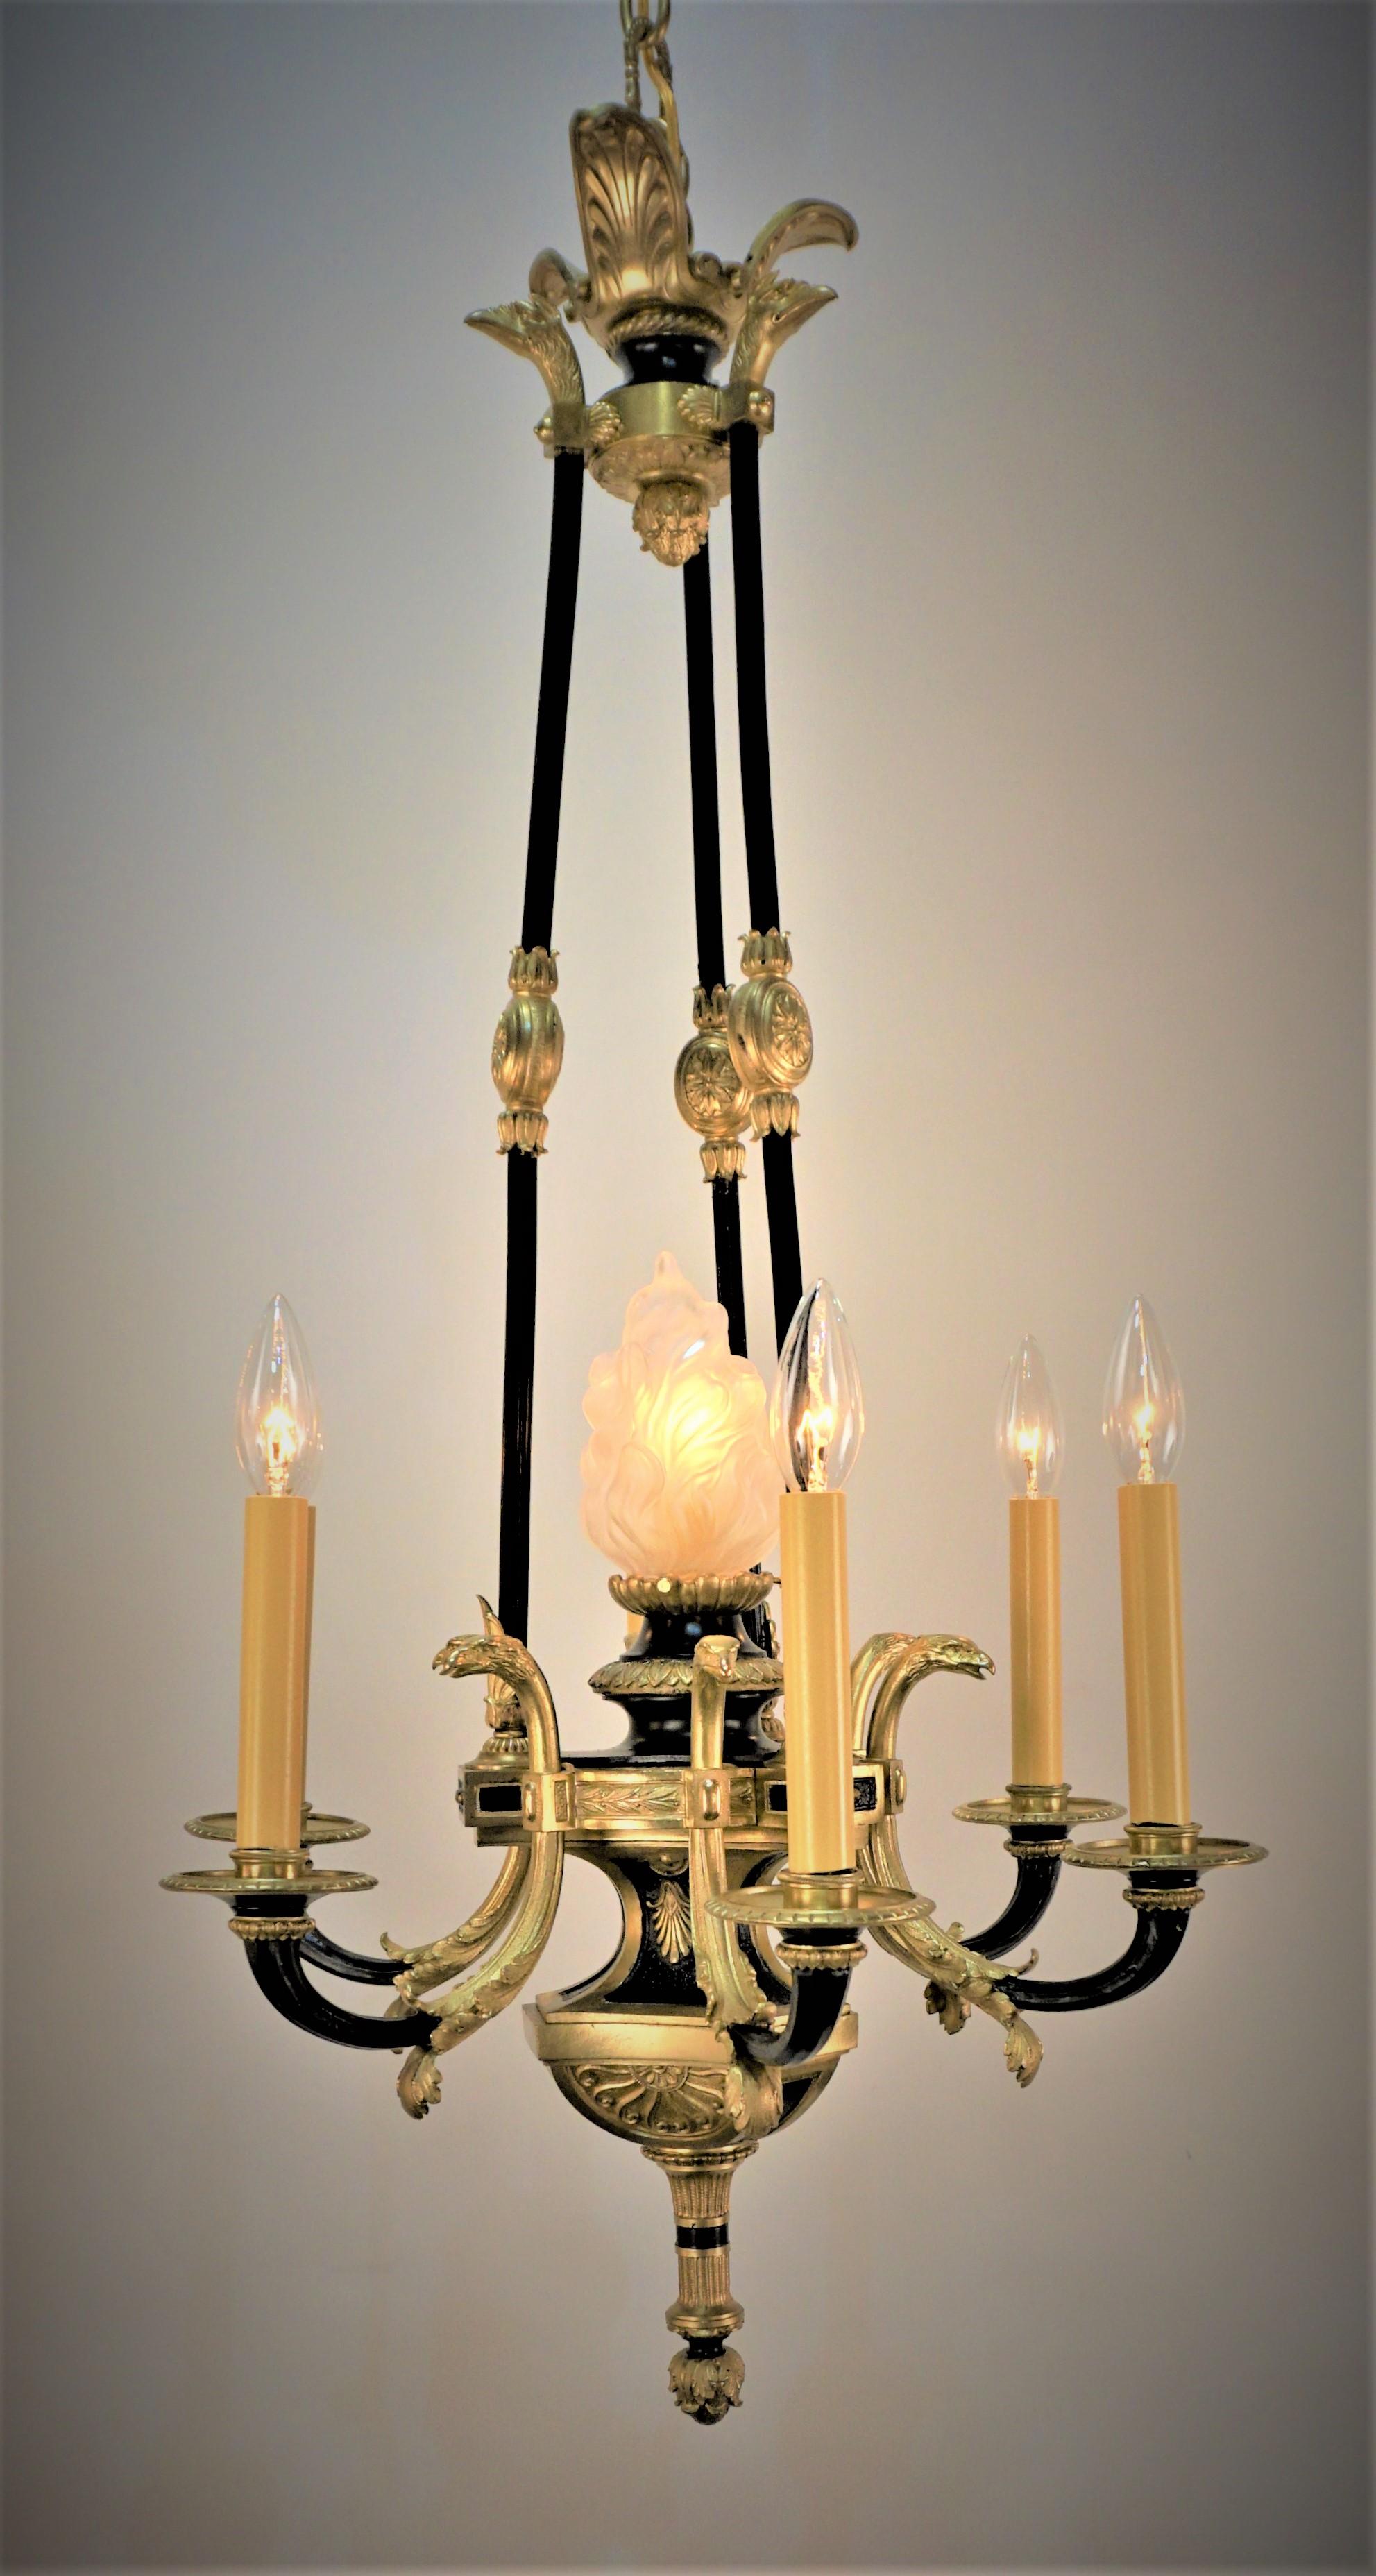 French 1930s Empire Bronze Chandelier In Good Condition For Sale In Fairfax, VA